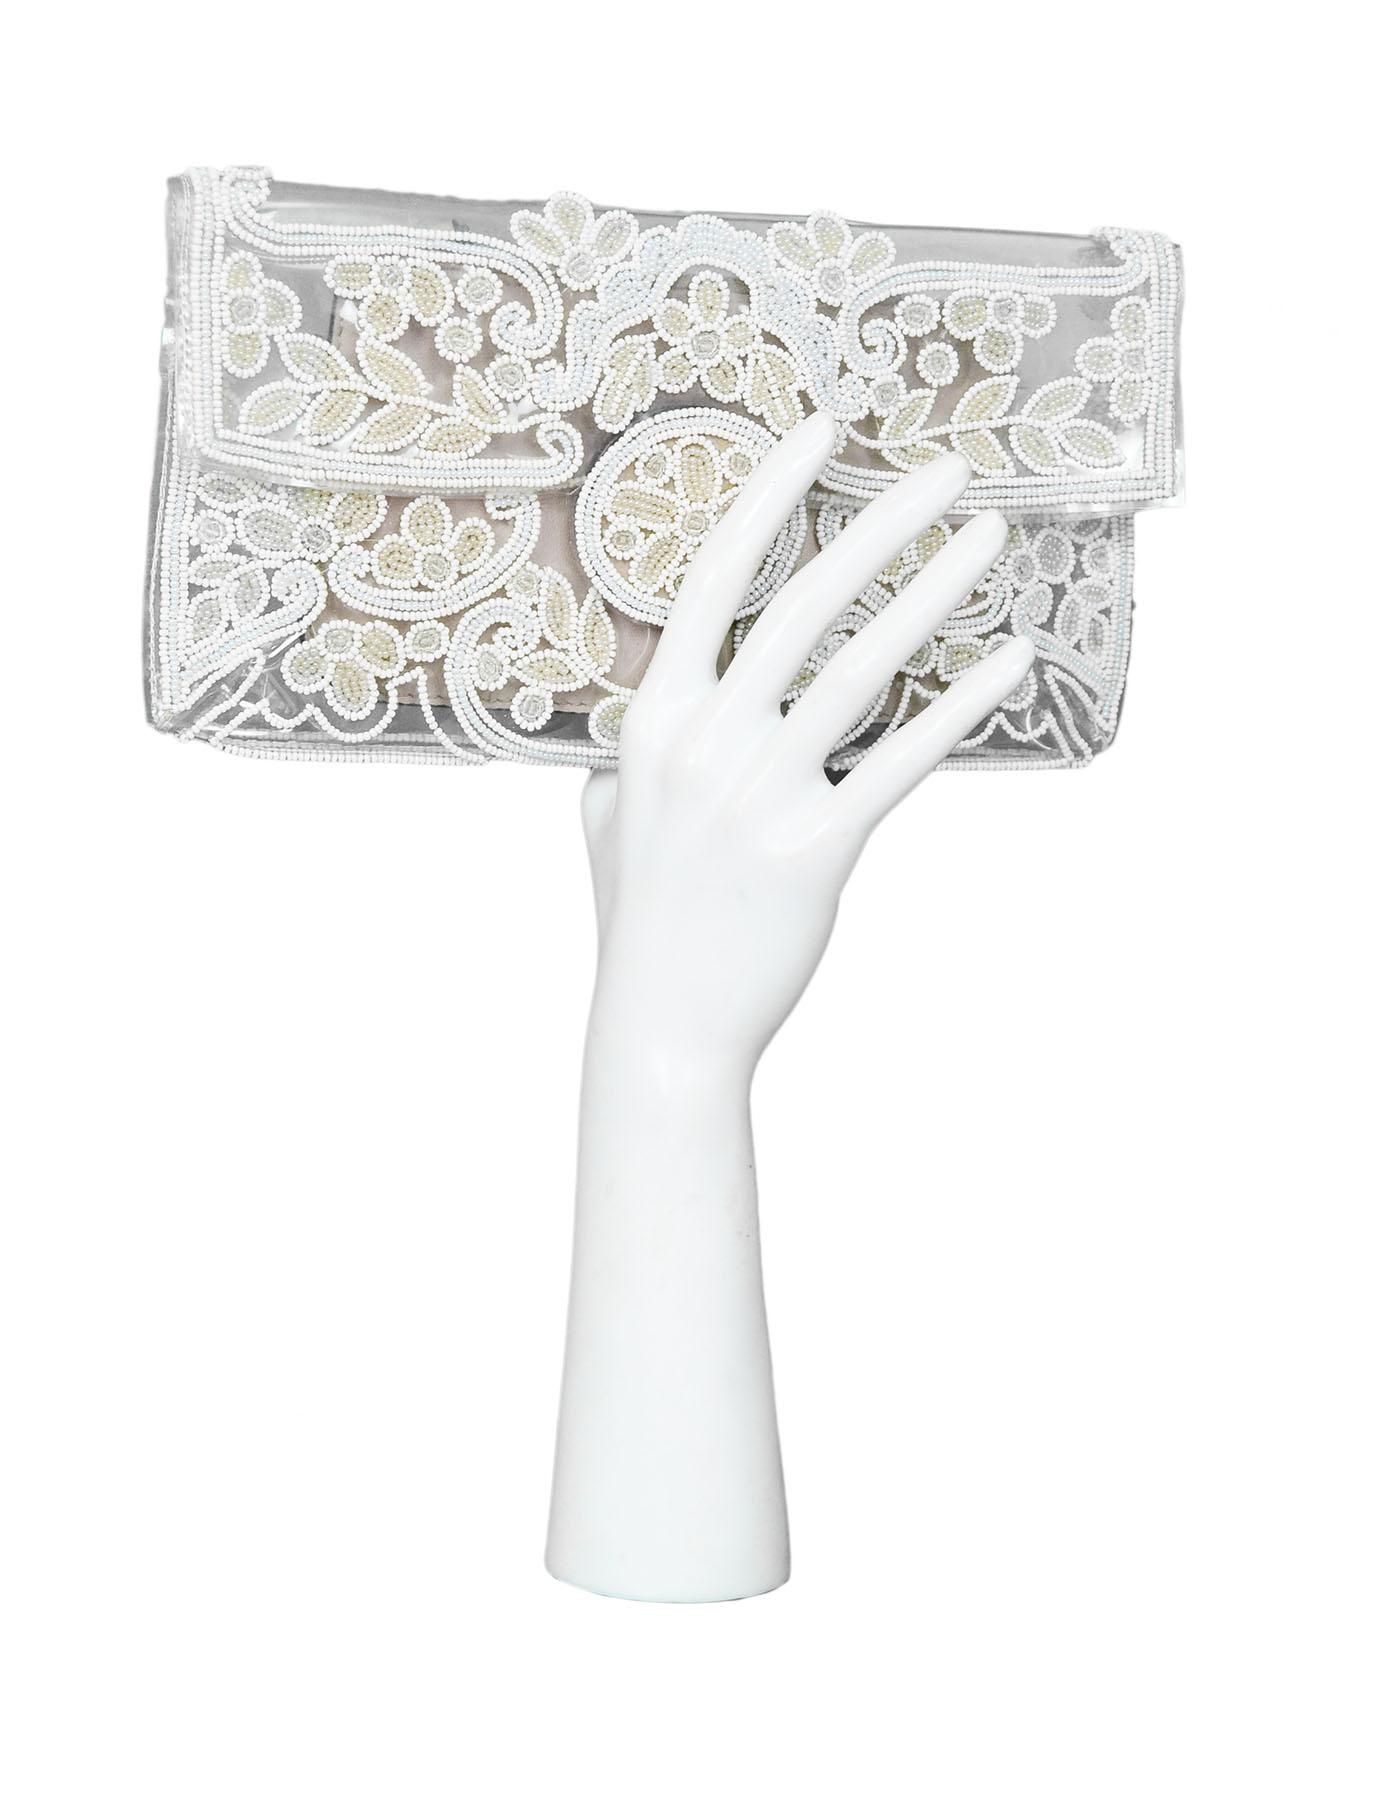 Valentino Clear PVC & White Beaded Clutch
Features small zip insert

Made In: Italy
Color: Clear, white
Hardware: Goldtone
Materials: PVC, beads, leather
Lining: None
Closure/Opening: Flap with snap closure
Exterior Pockets: None
Interior Pockets: